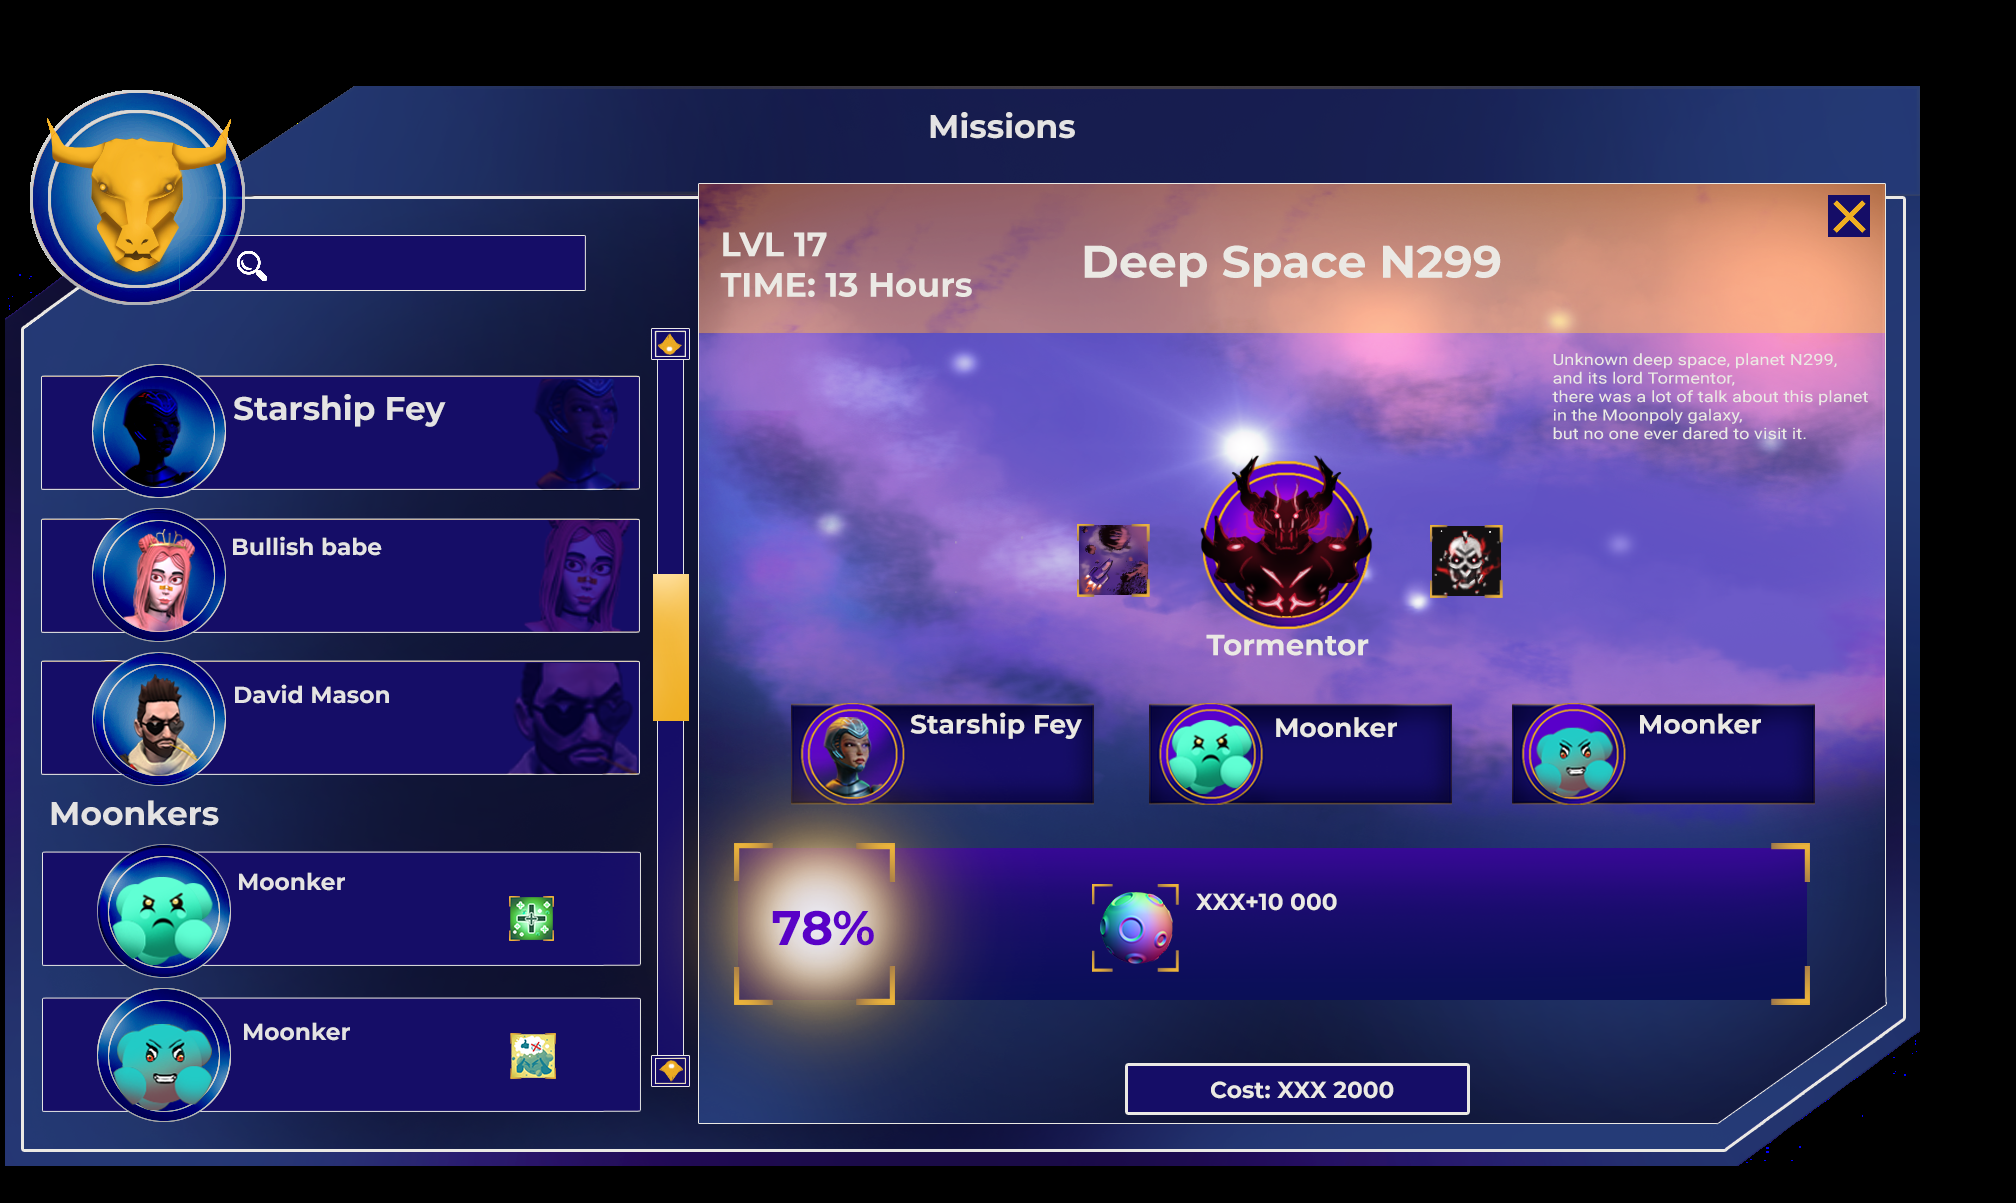 game image from Moonpoly